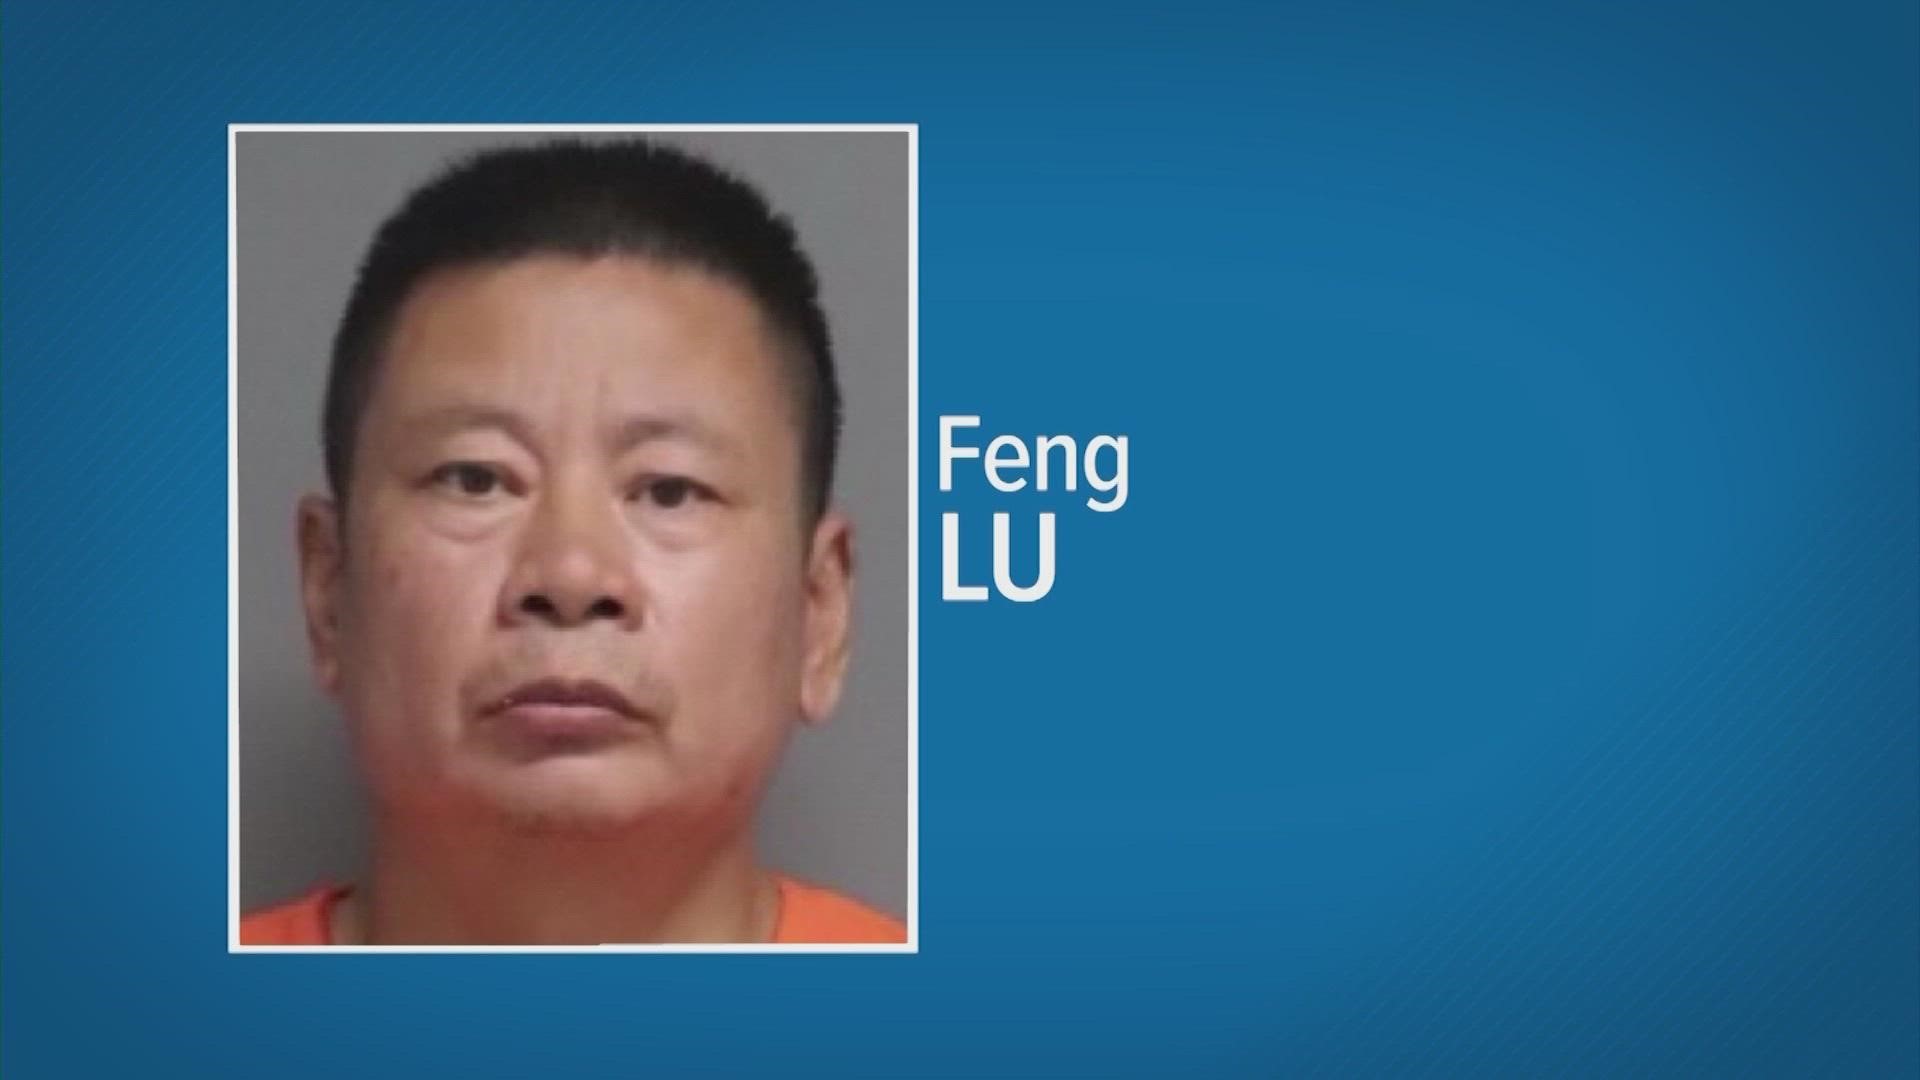 Feng Lu is charged with capital murder. He's accused of killing four members of the Sun family execution-style inside their Cypress house.